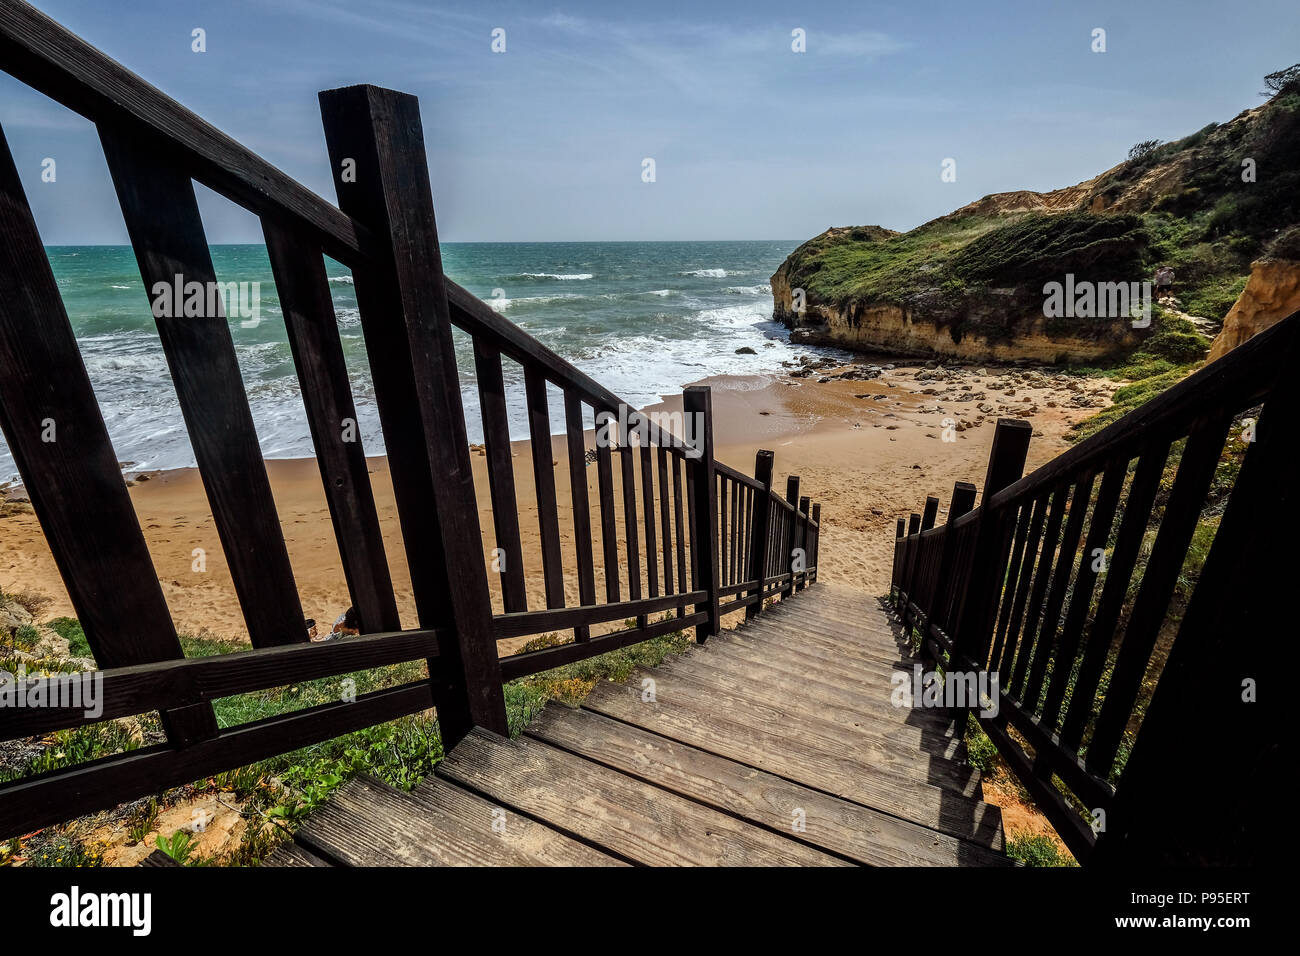 Wooden Stair to the Beach in Albufeira portugal Stock Photo